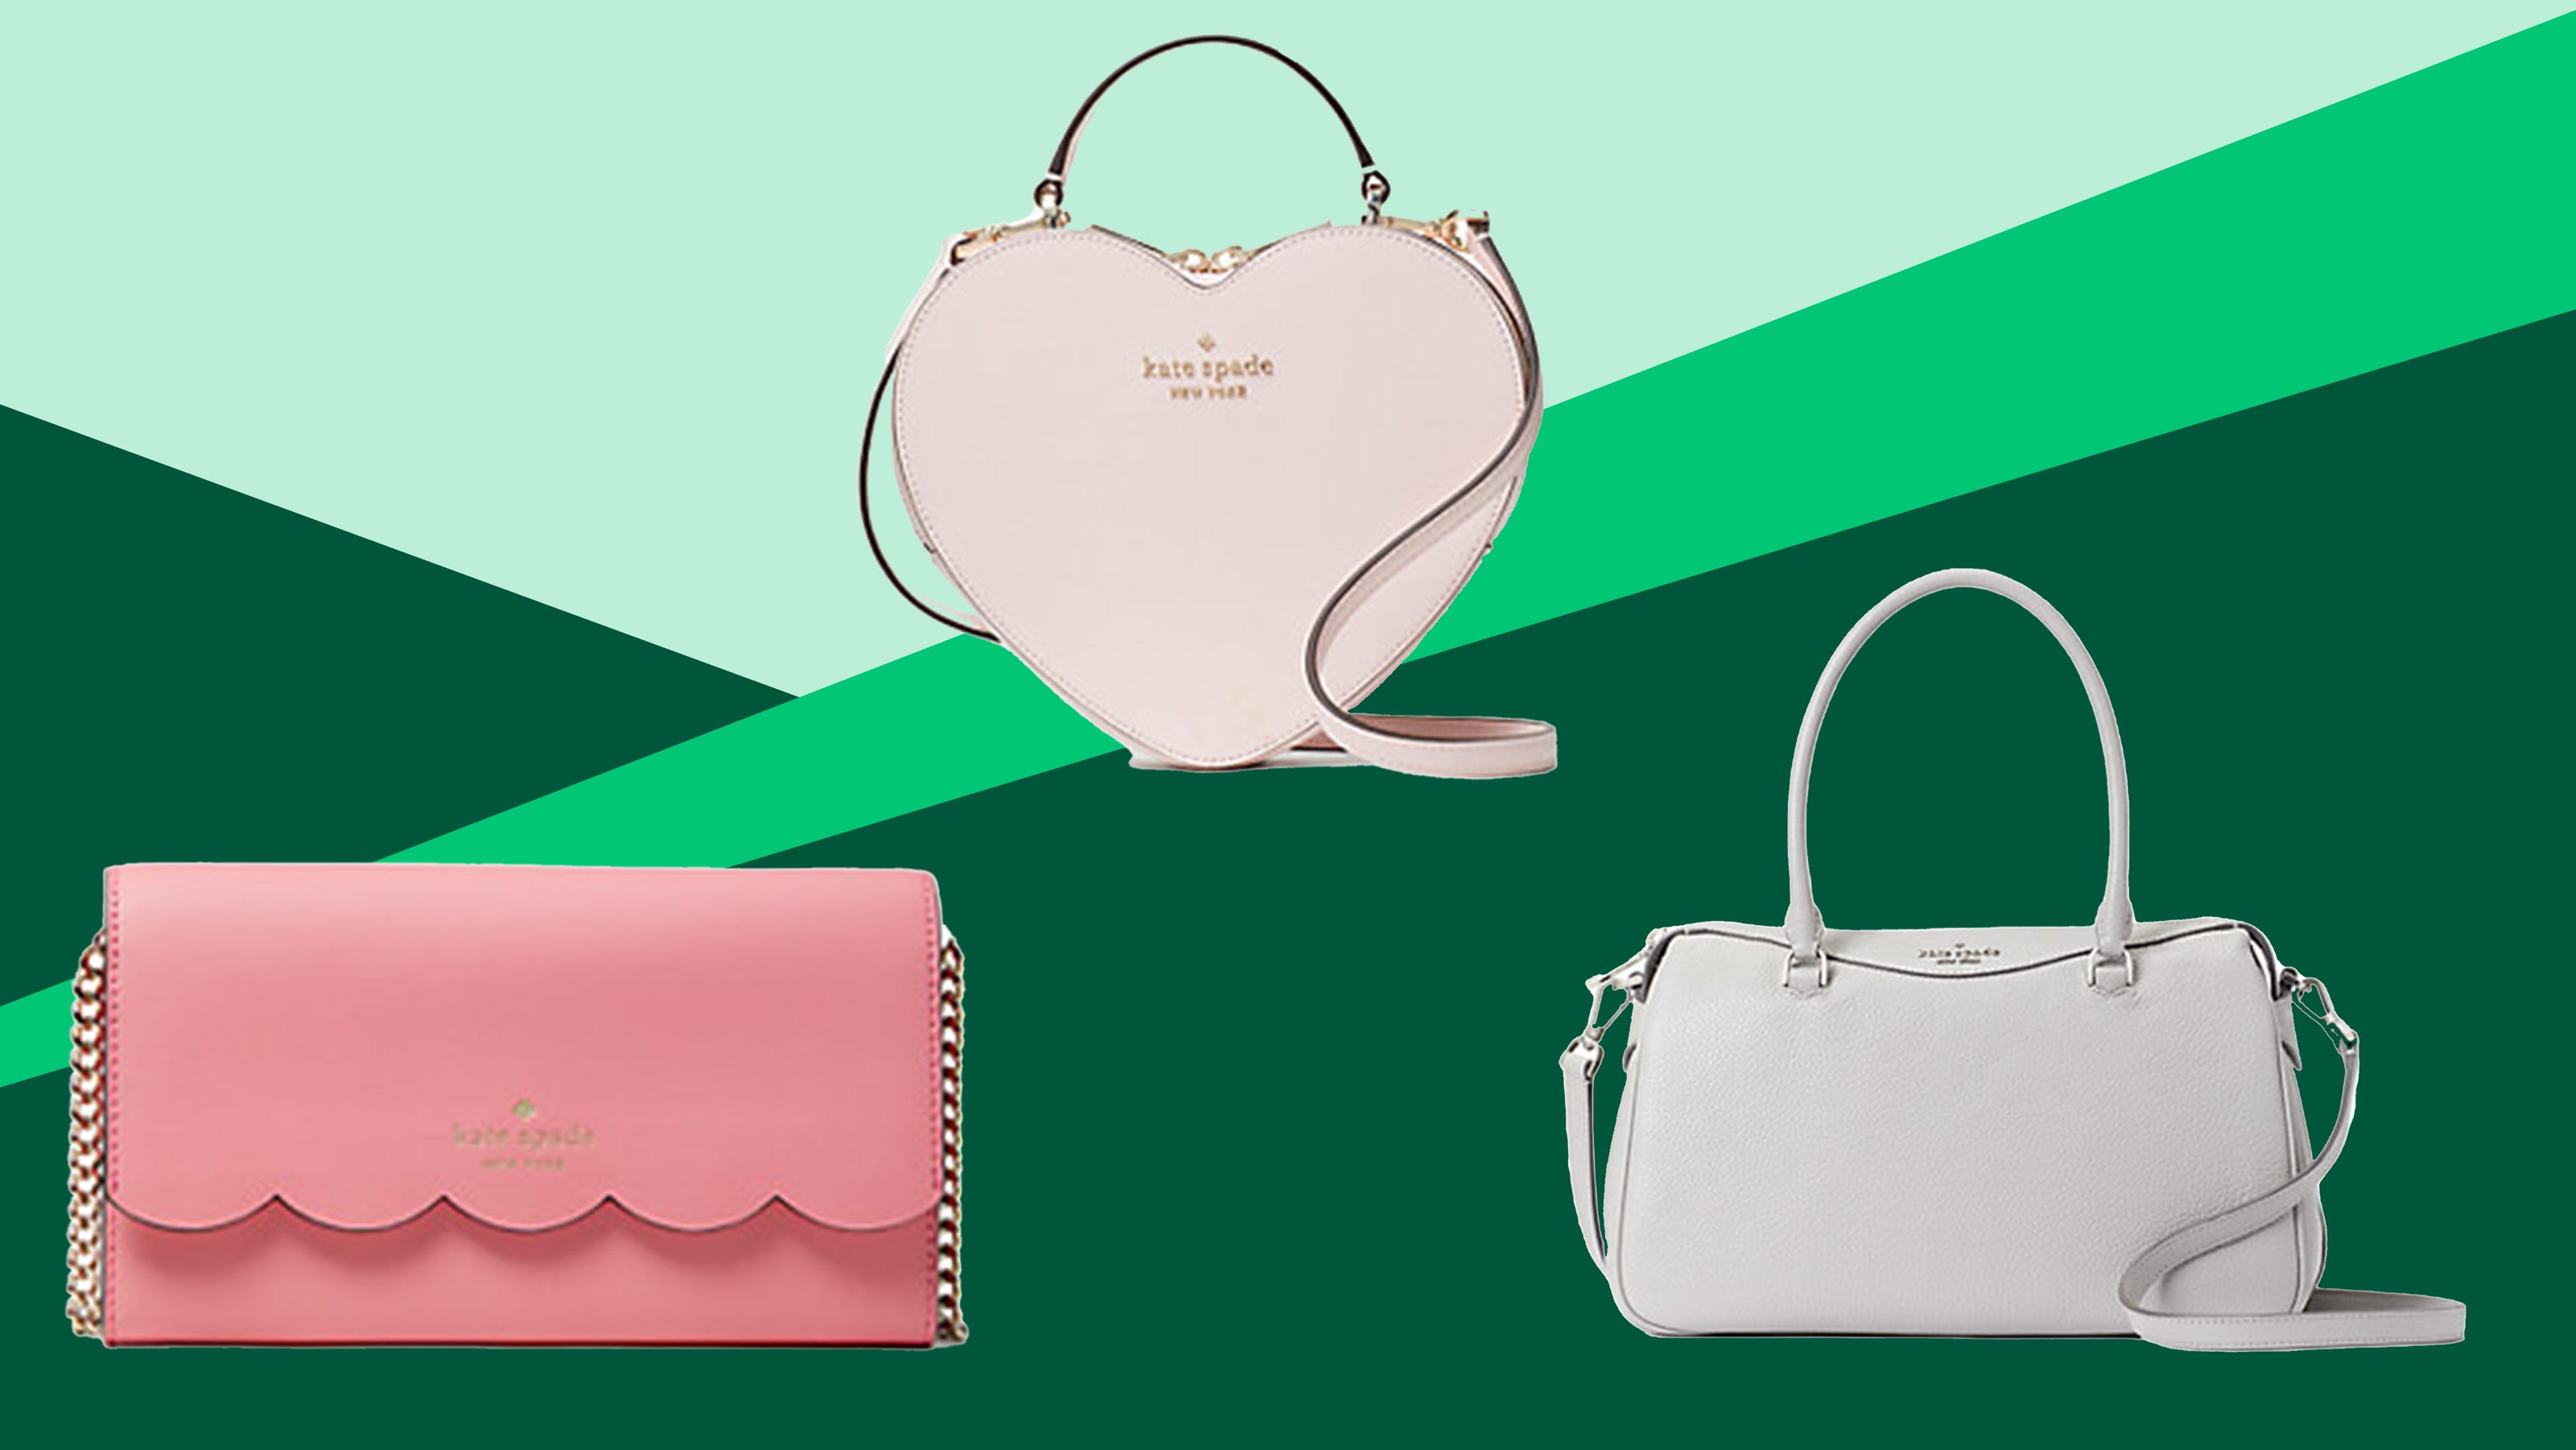 Kate Spade Surprise sale: Save up to 75% on purses, wallets and more